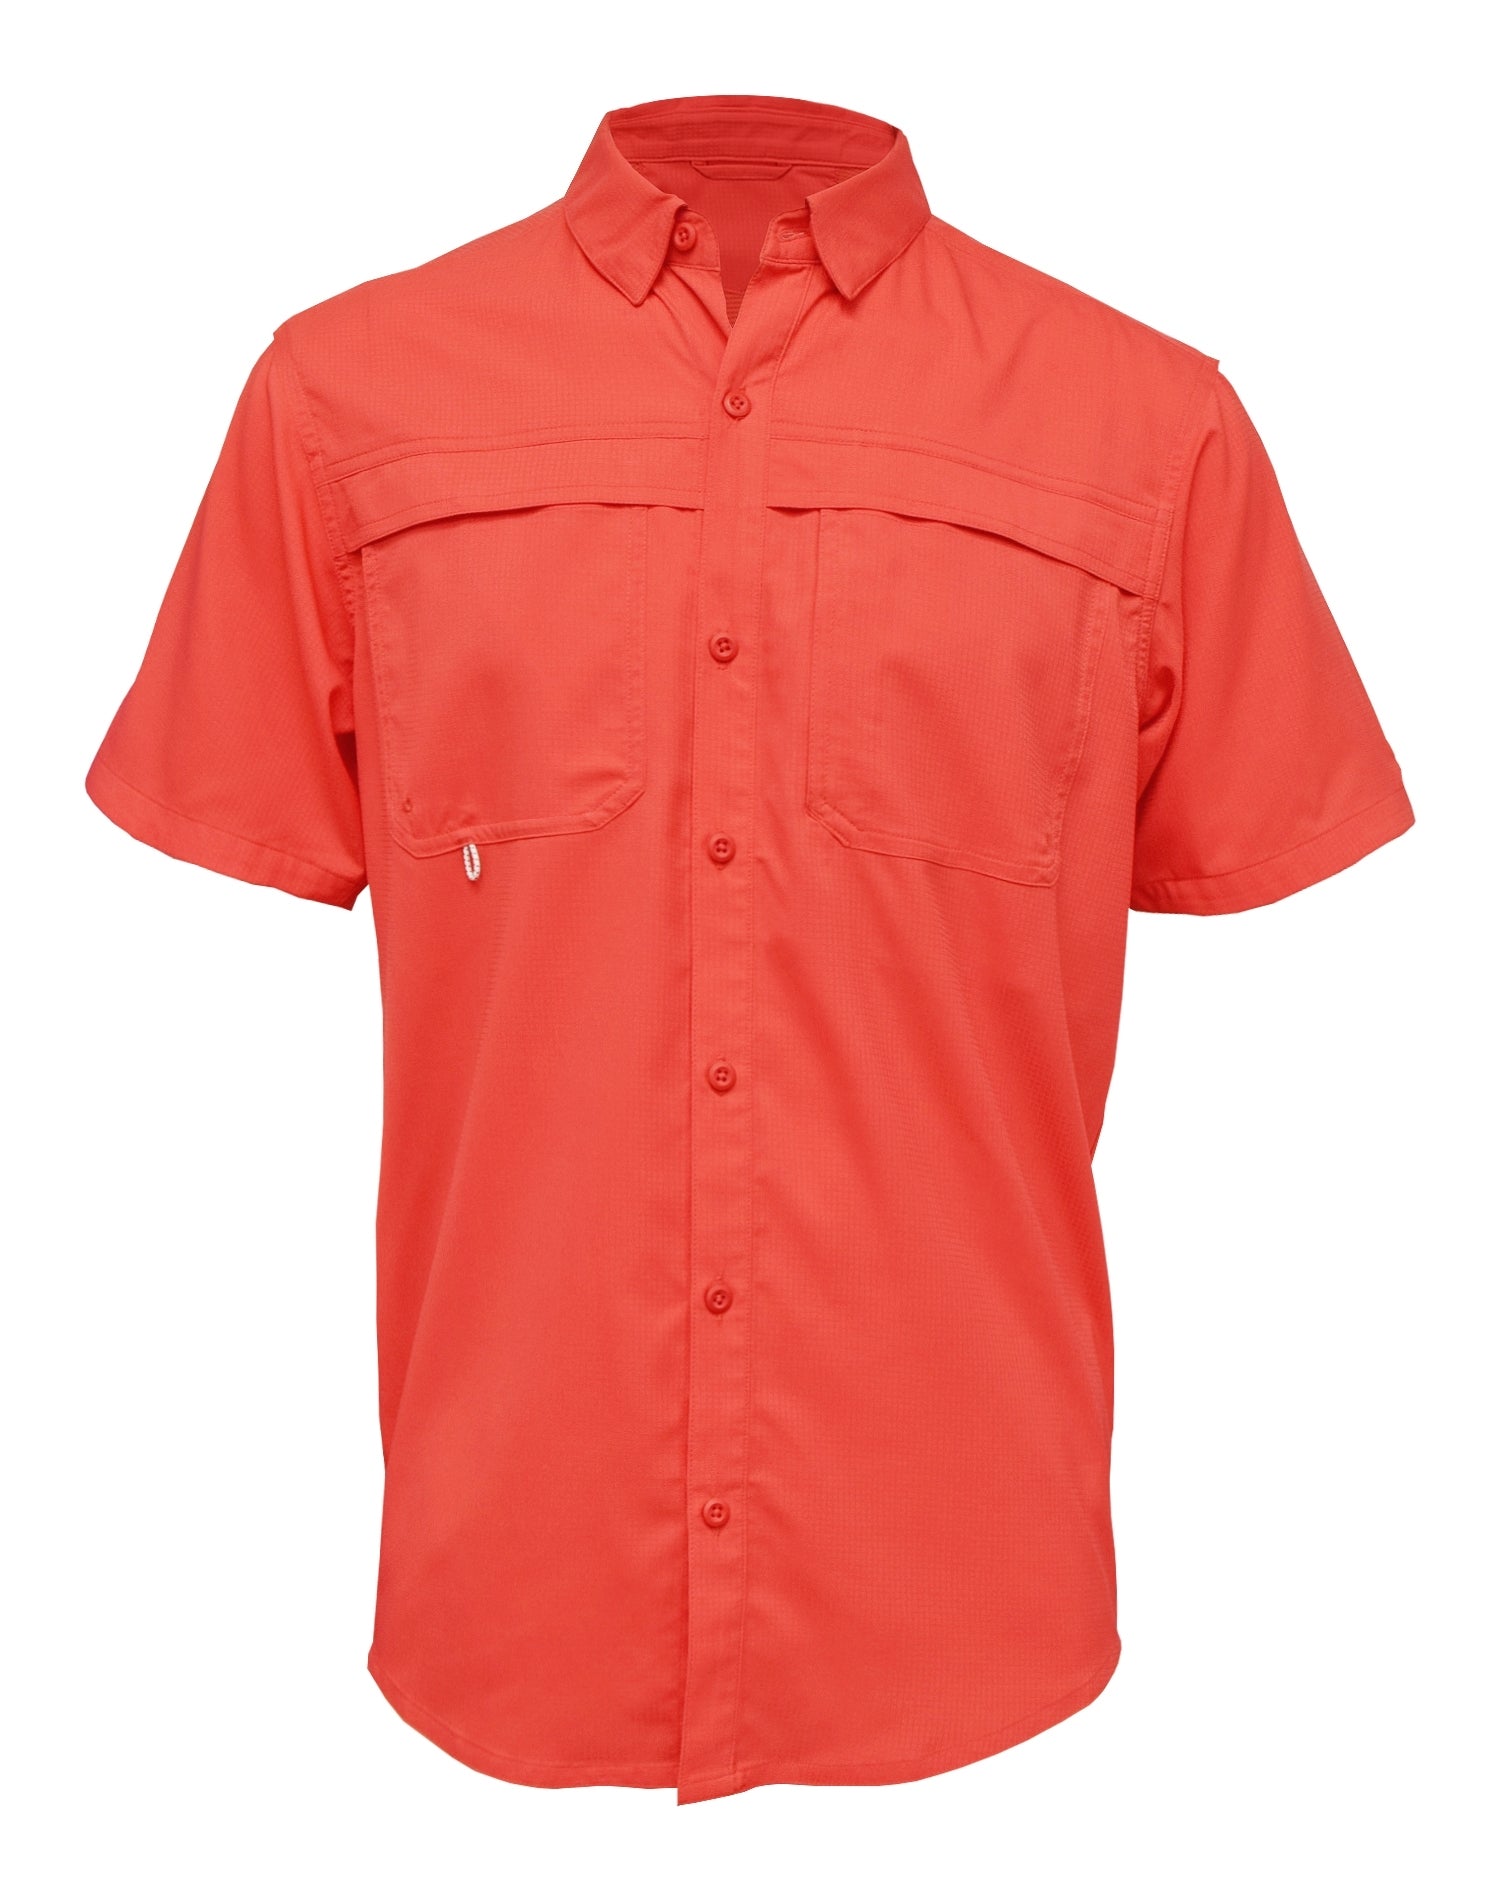 Men's Short Sleeve SoWal TFS in Coral Size: S